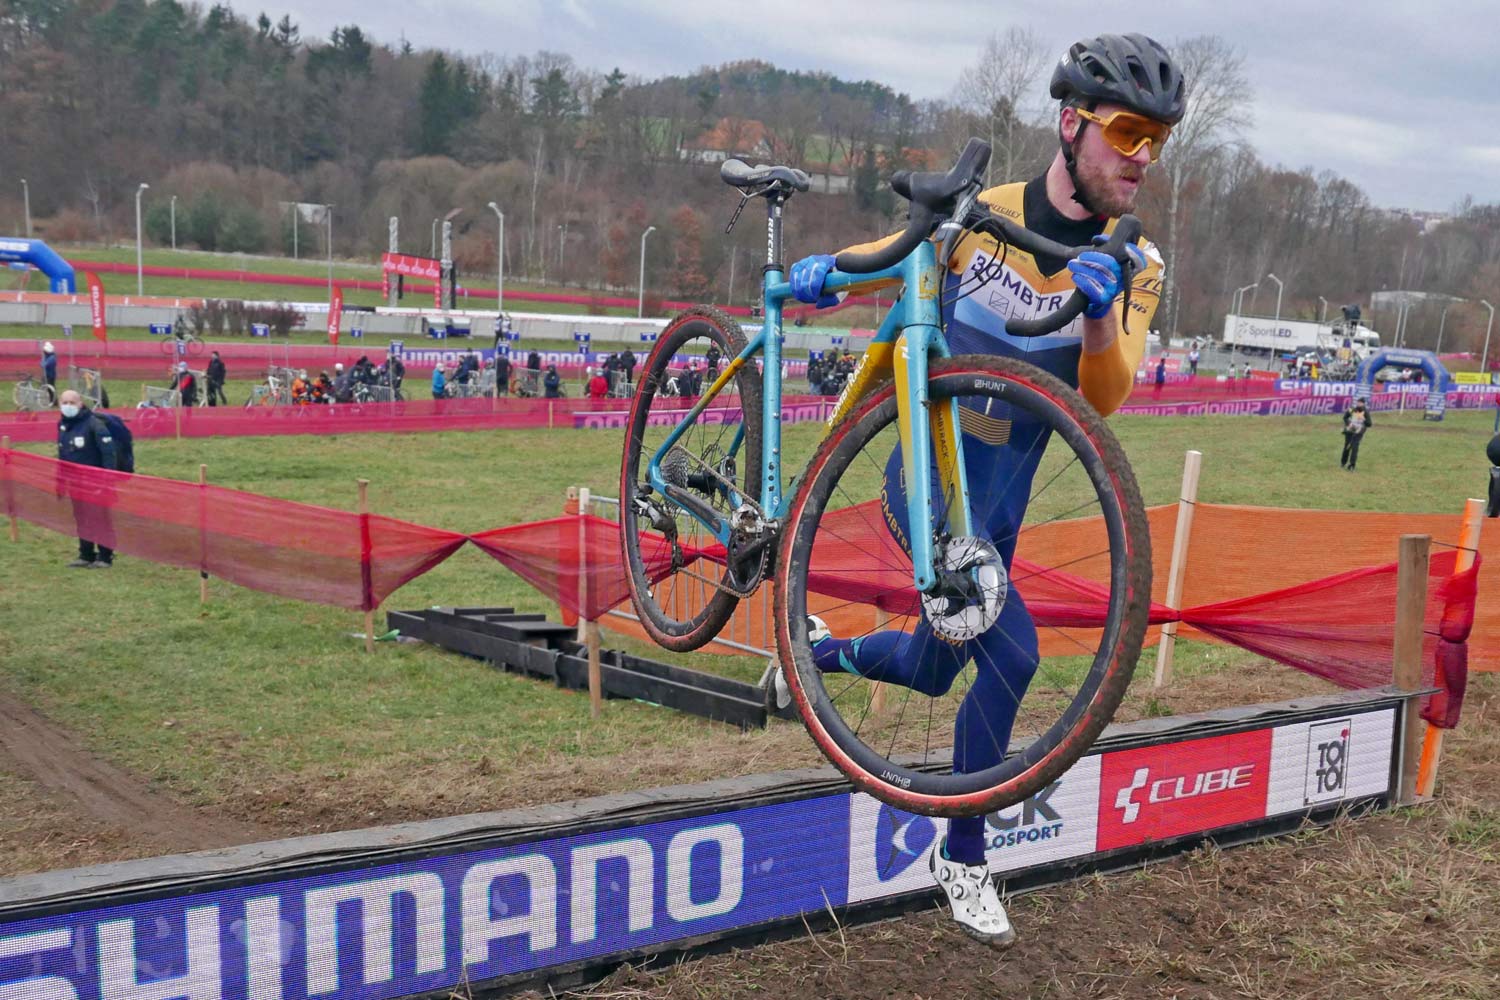 CX Pro Bike Check, 2021 Bombtrack Tension C, affordable World Cup-ready carbon cyclocross bike of Gosse van der Meer, aka Gossinki over the Tabor barriers